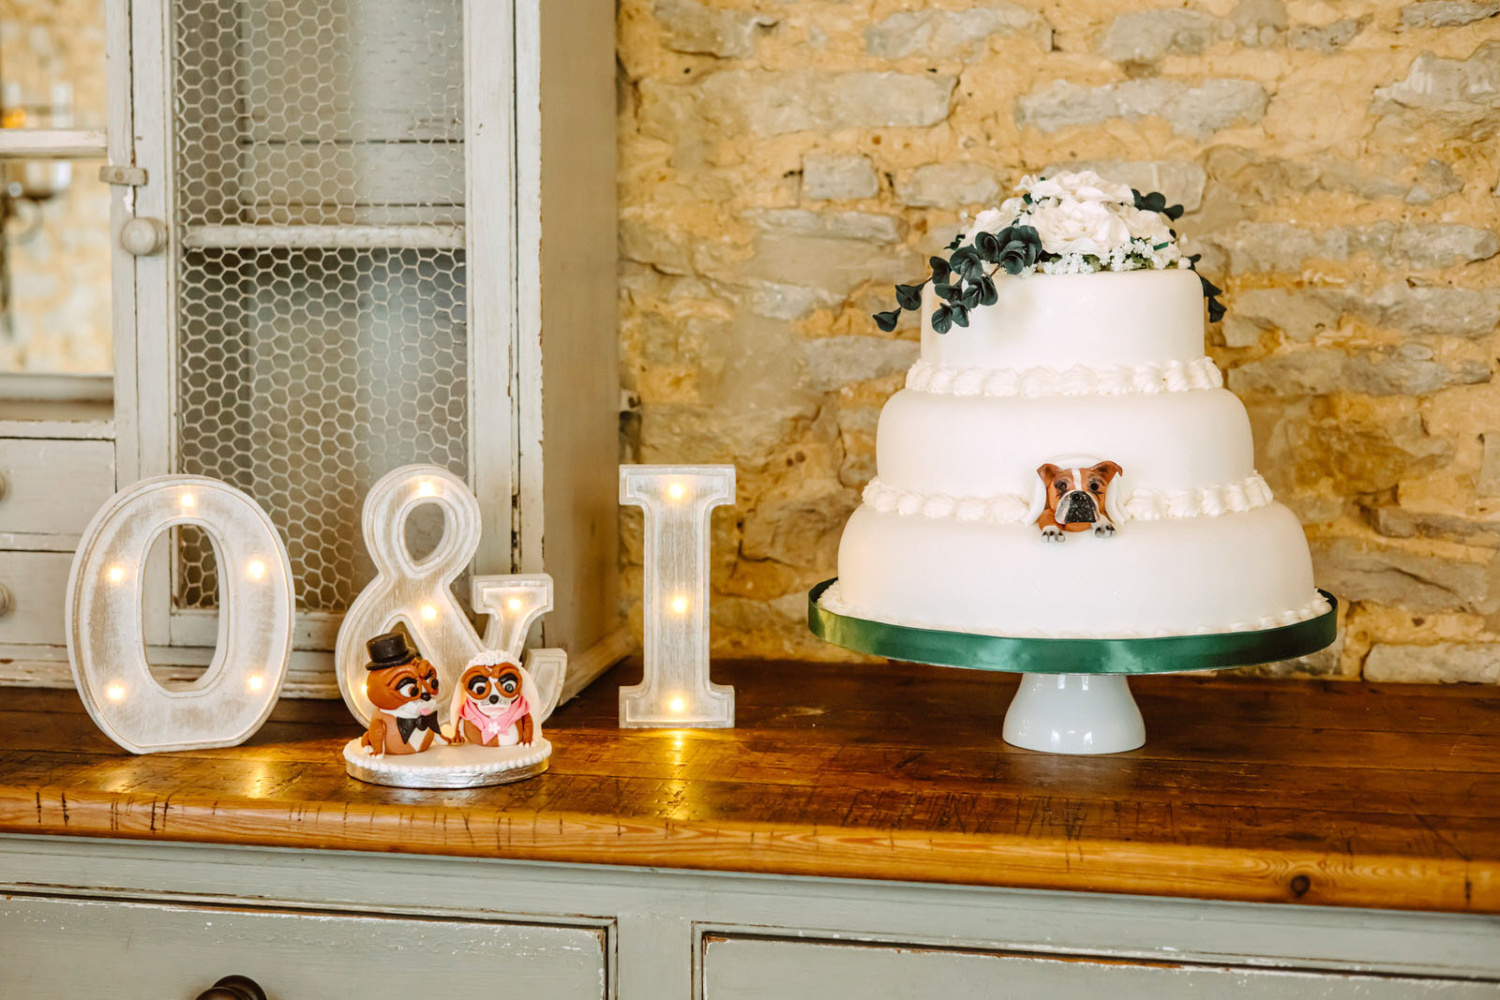 A wedding cake is sitting on top of a wooden table.